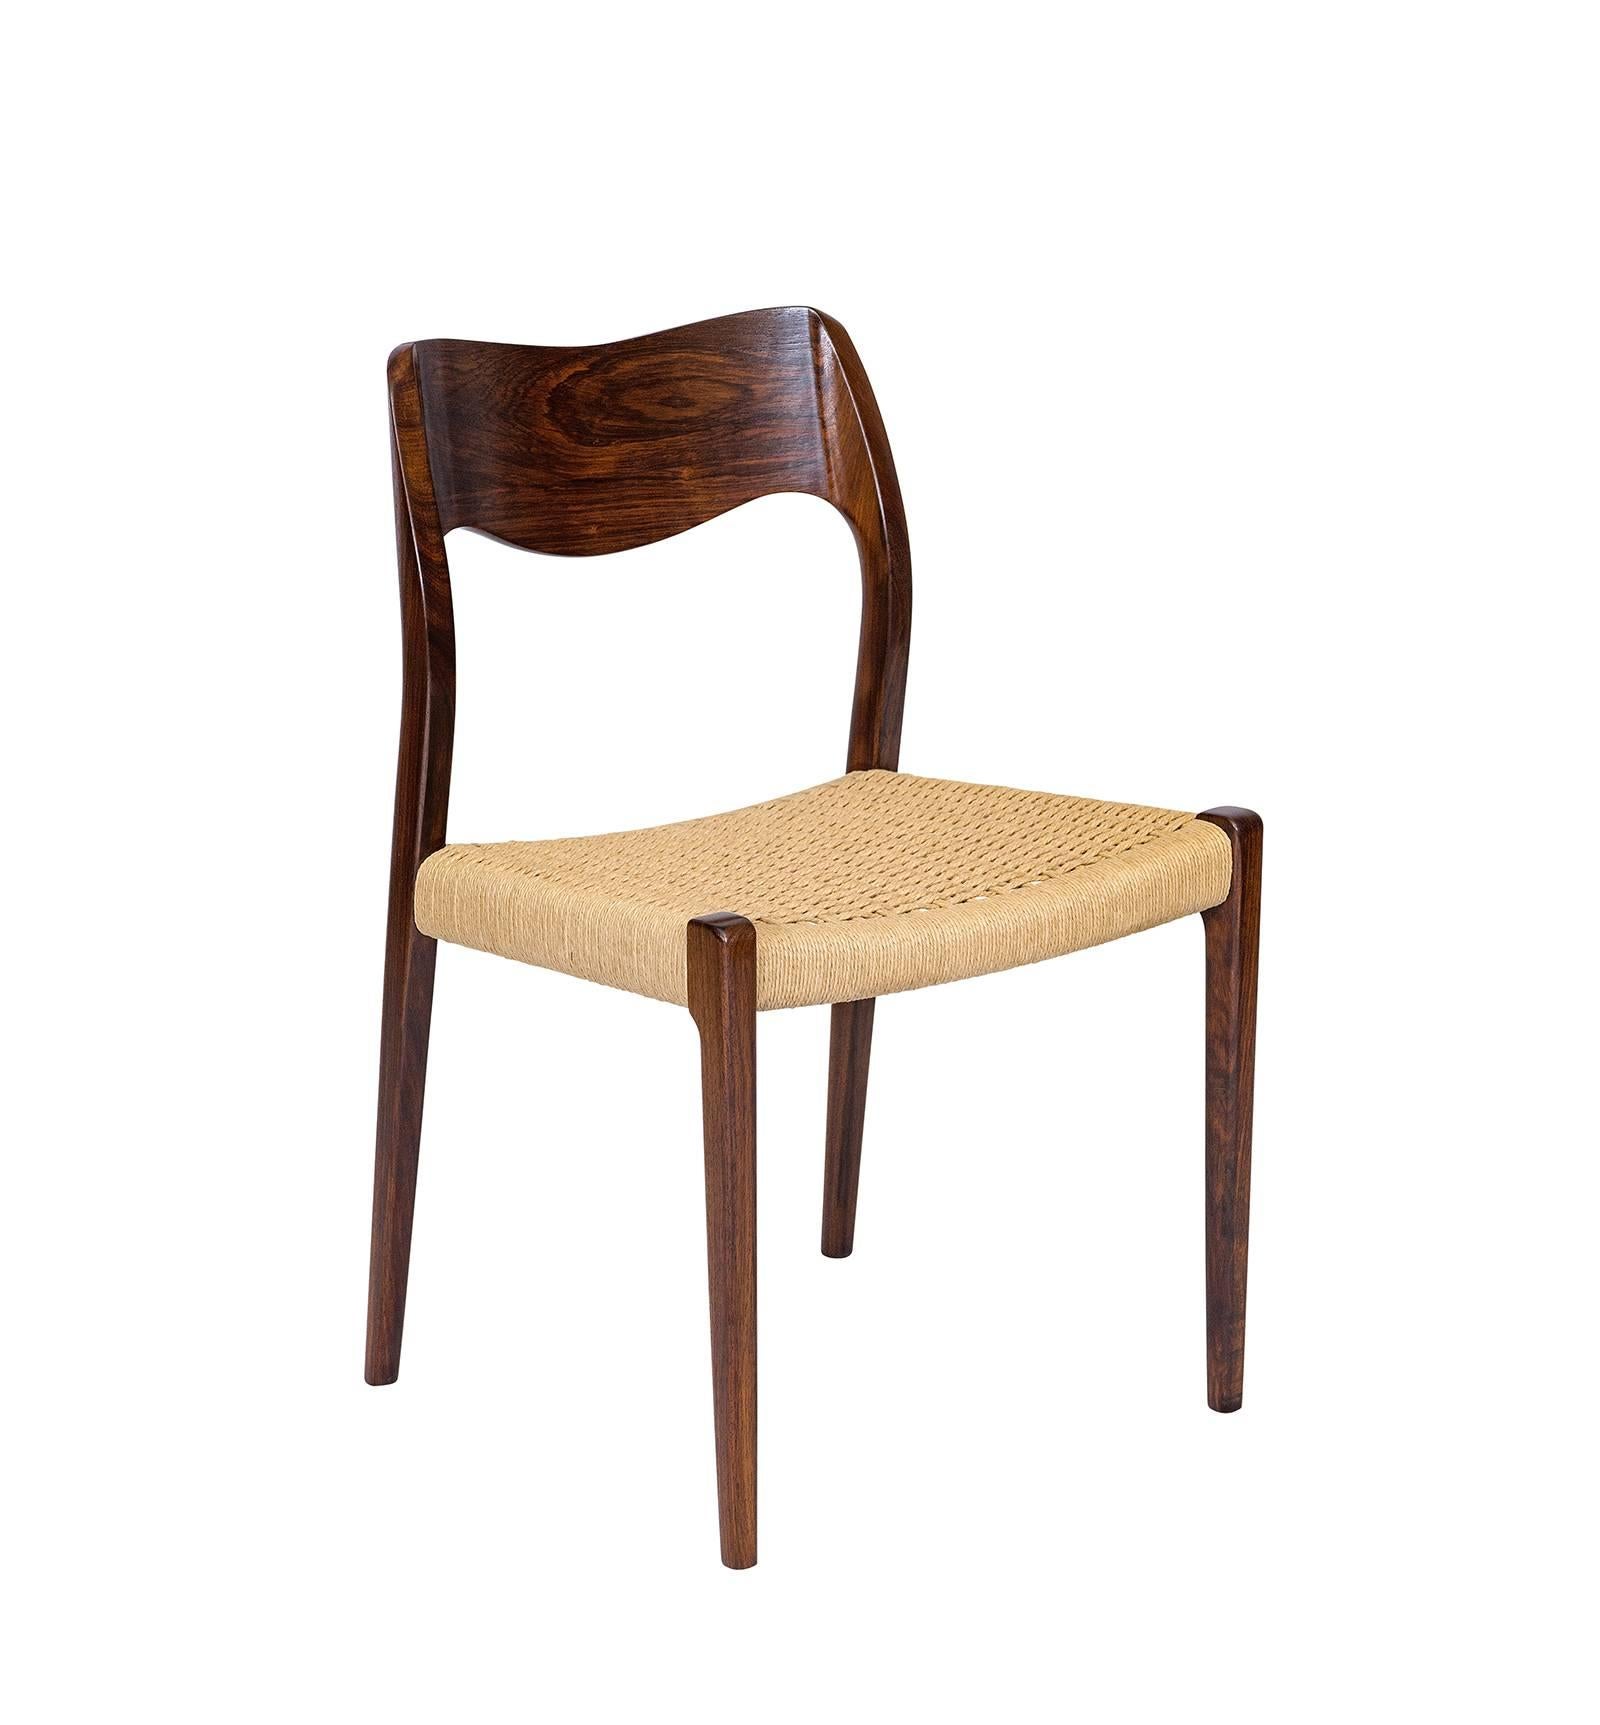 Set of six rosewood Niels Møller model #71 dining chairs designed in 1951 and produced by J. L. Møller Møbelfabrik.